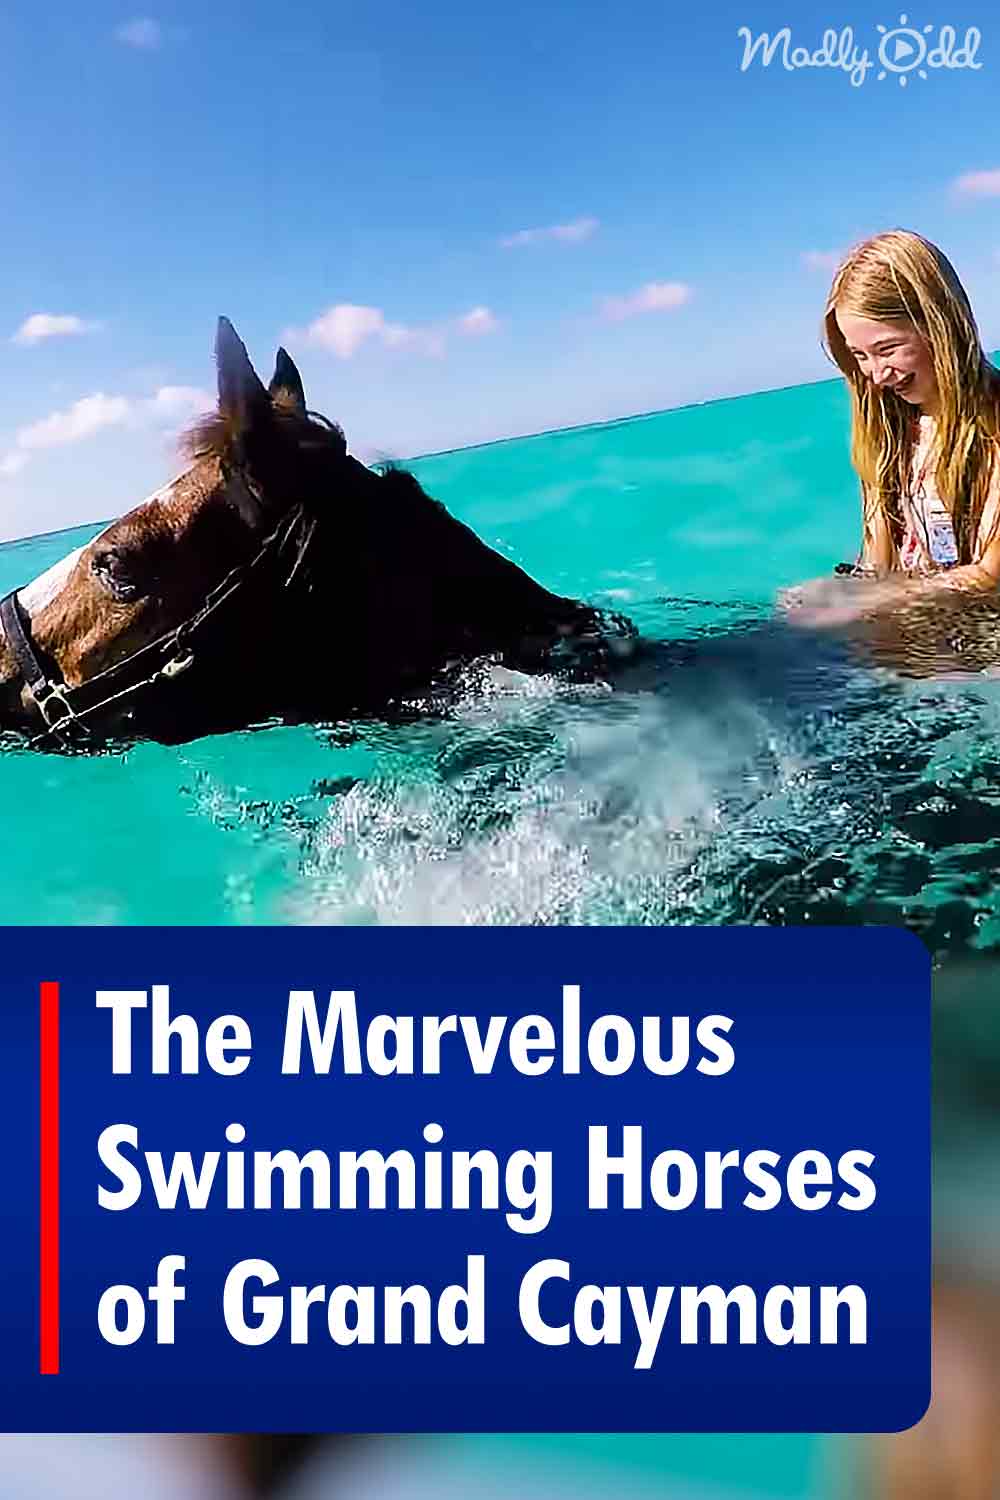 The Marvelous Swimming Horses of Grand Cayman